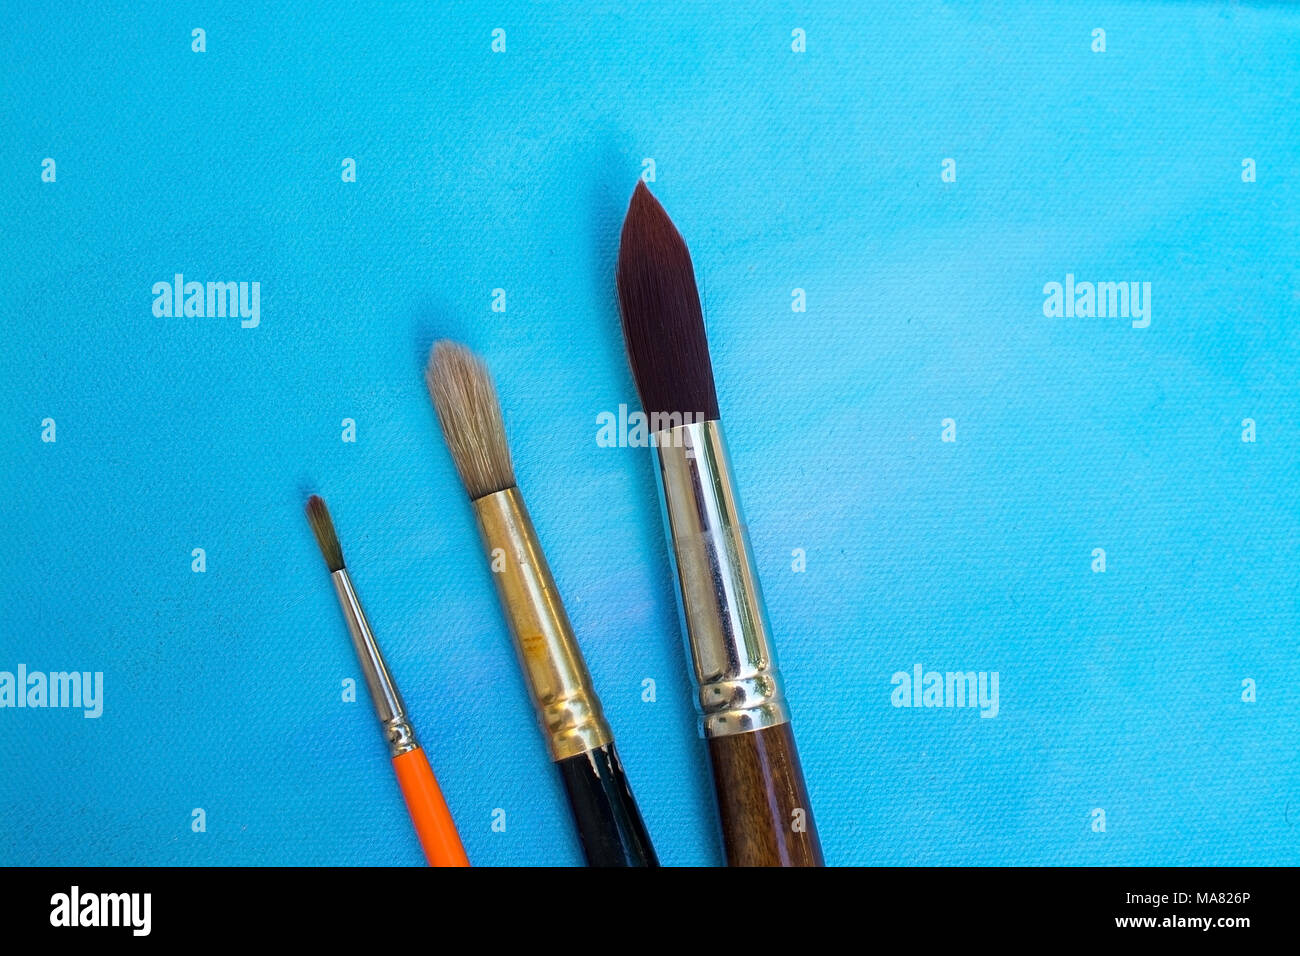 Brushes on blue painted canvas background texture background, concept for grades in school development, creative expression artist concept Stock Photo